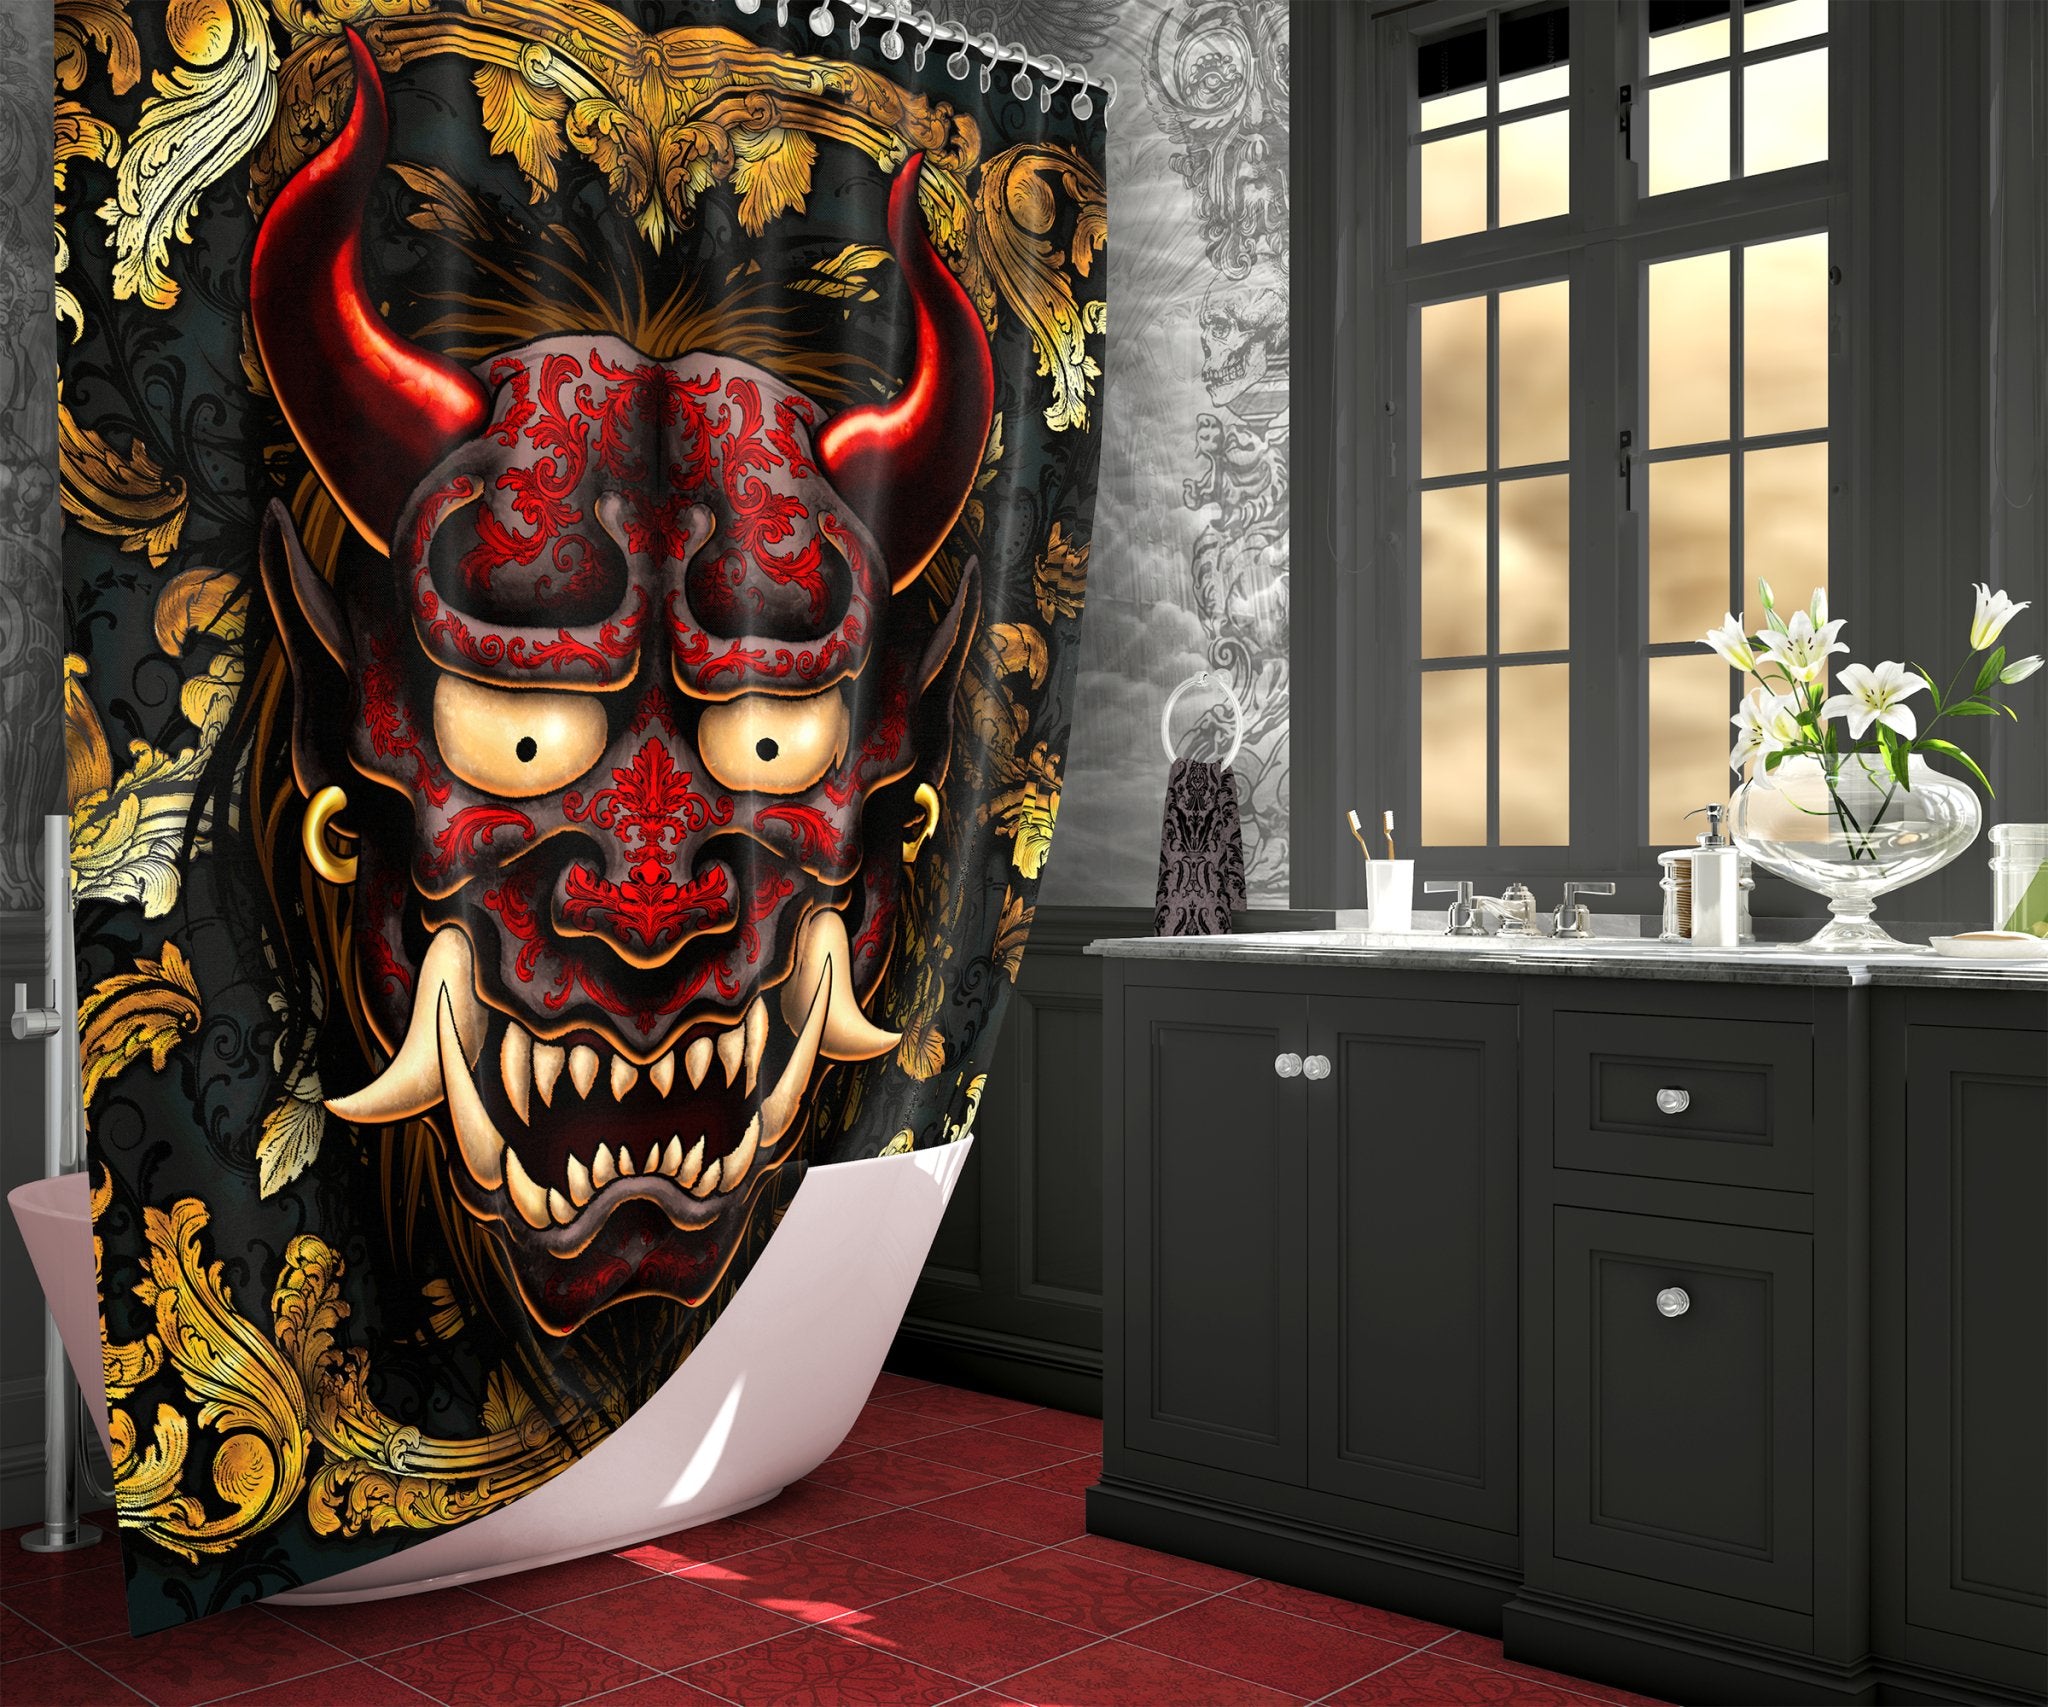 Anime Shower Curtain, 71x74 inches, Red Demon Bathroom Decor, Fantasy, Japanese Oni - Black, Silver or Gold, 4 Colors - Abysm Internal